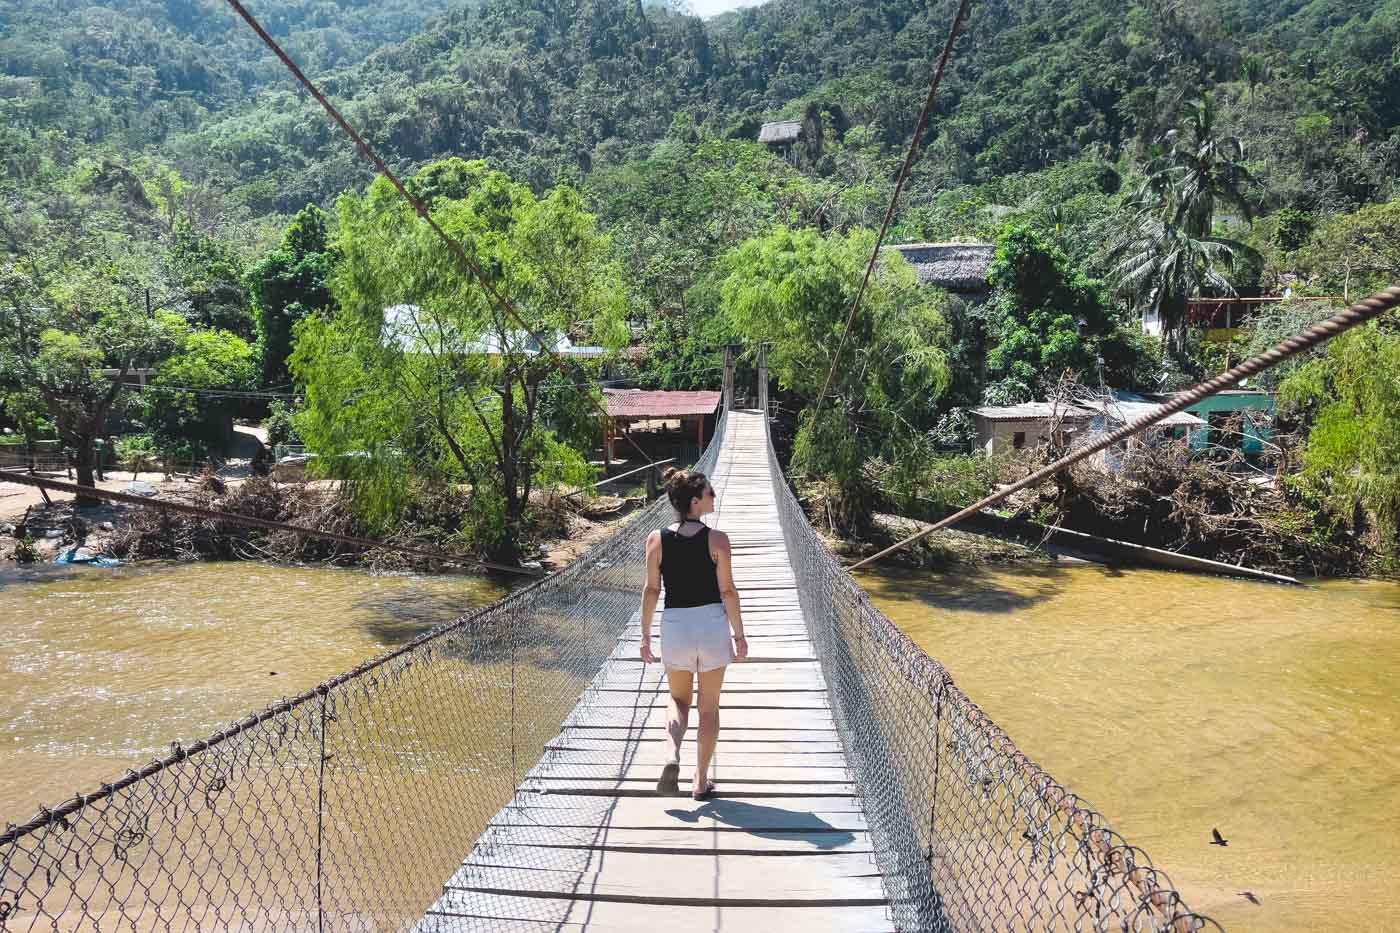 Nina crossing a long, wooden suspension bridge over a brown river heading towards the forests of Yelapa.